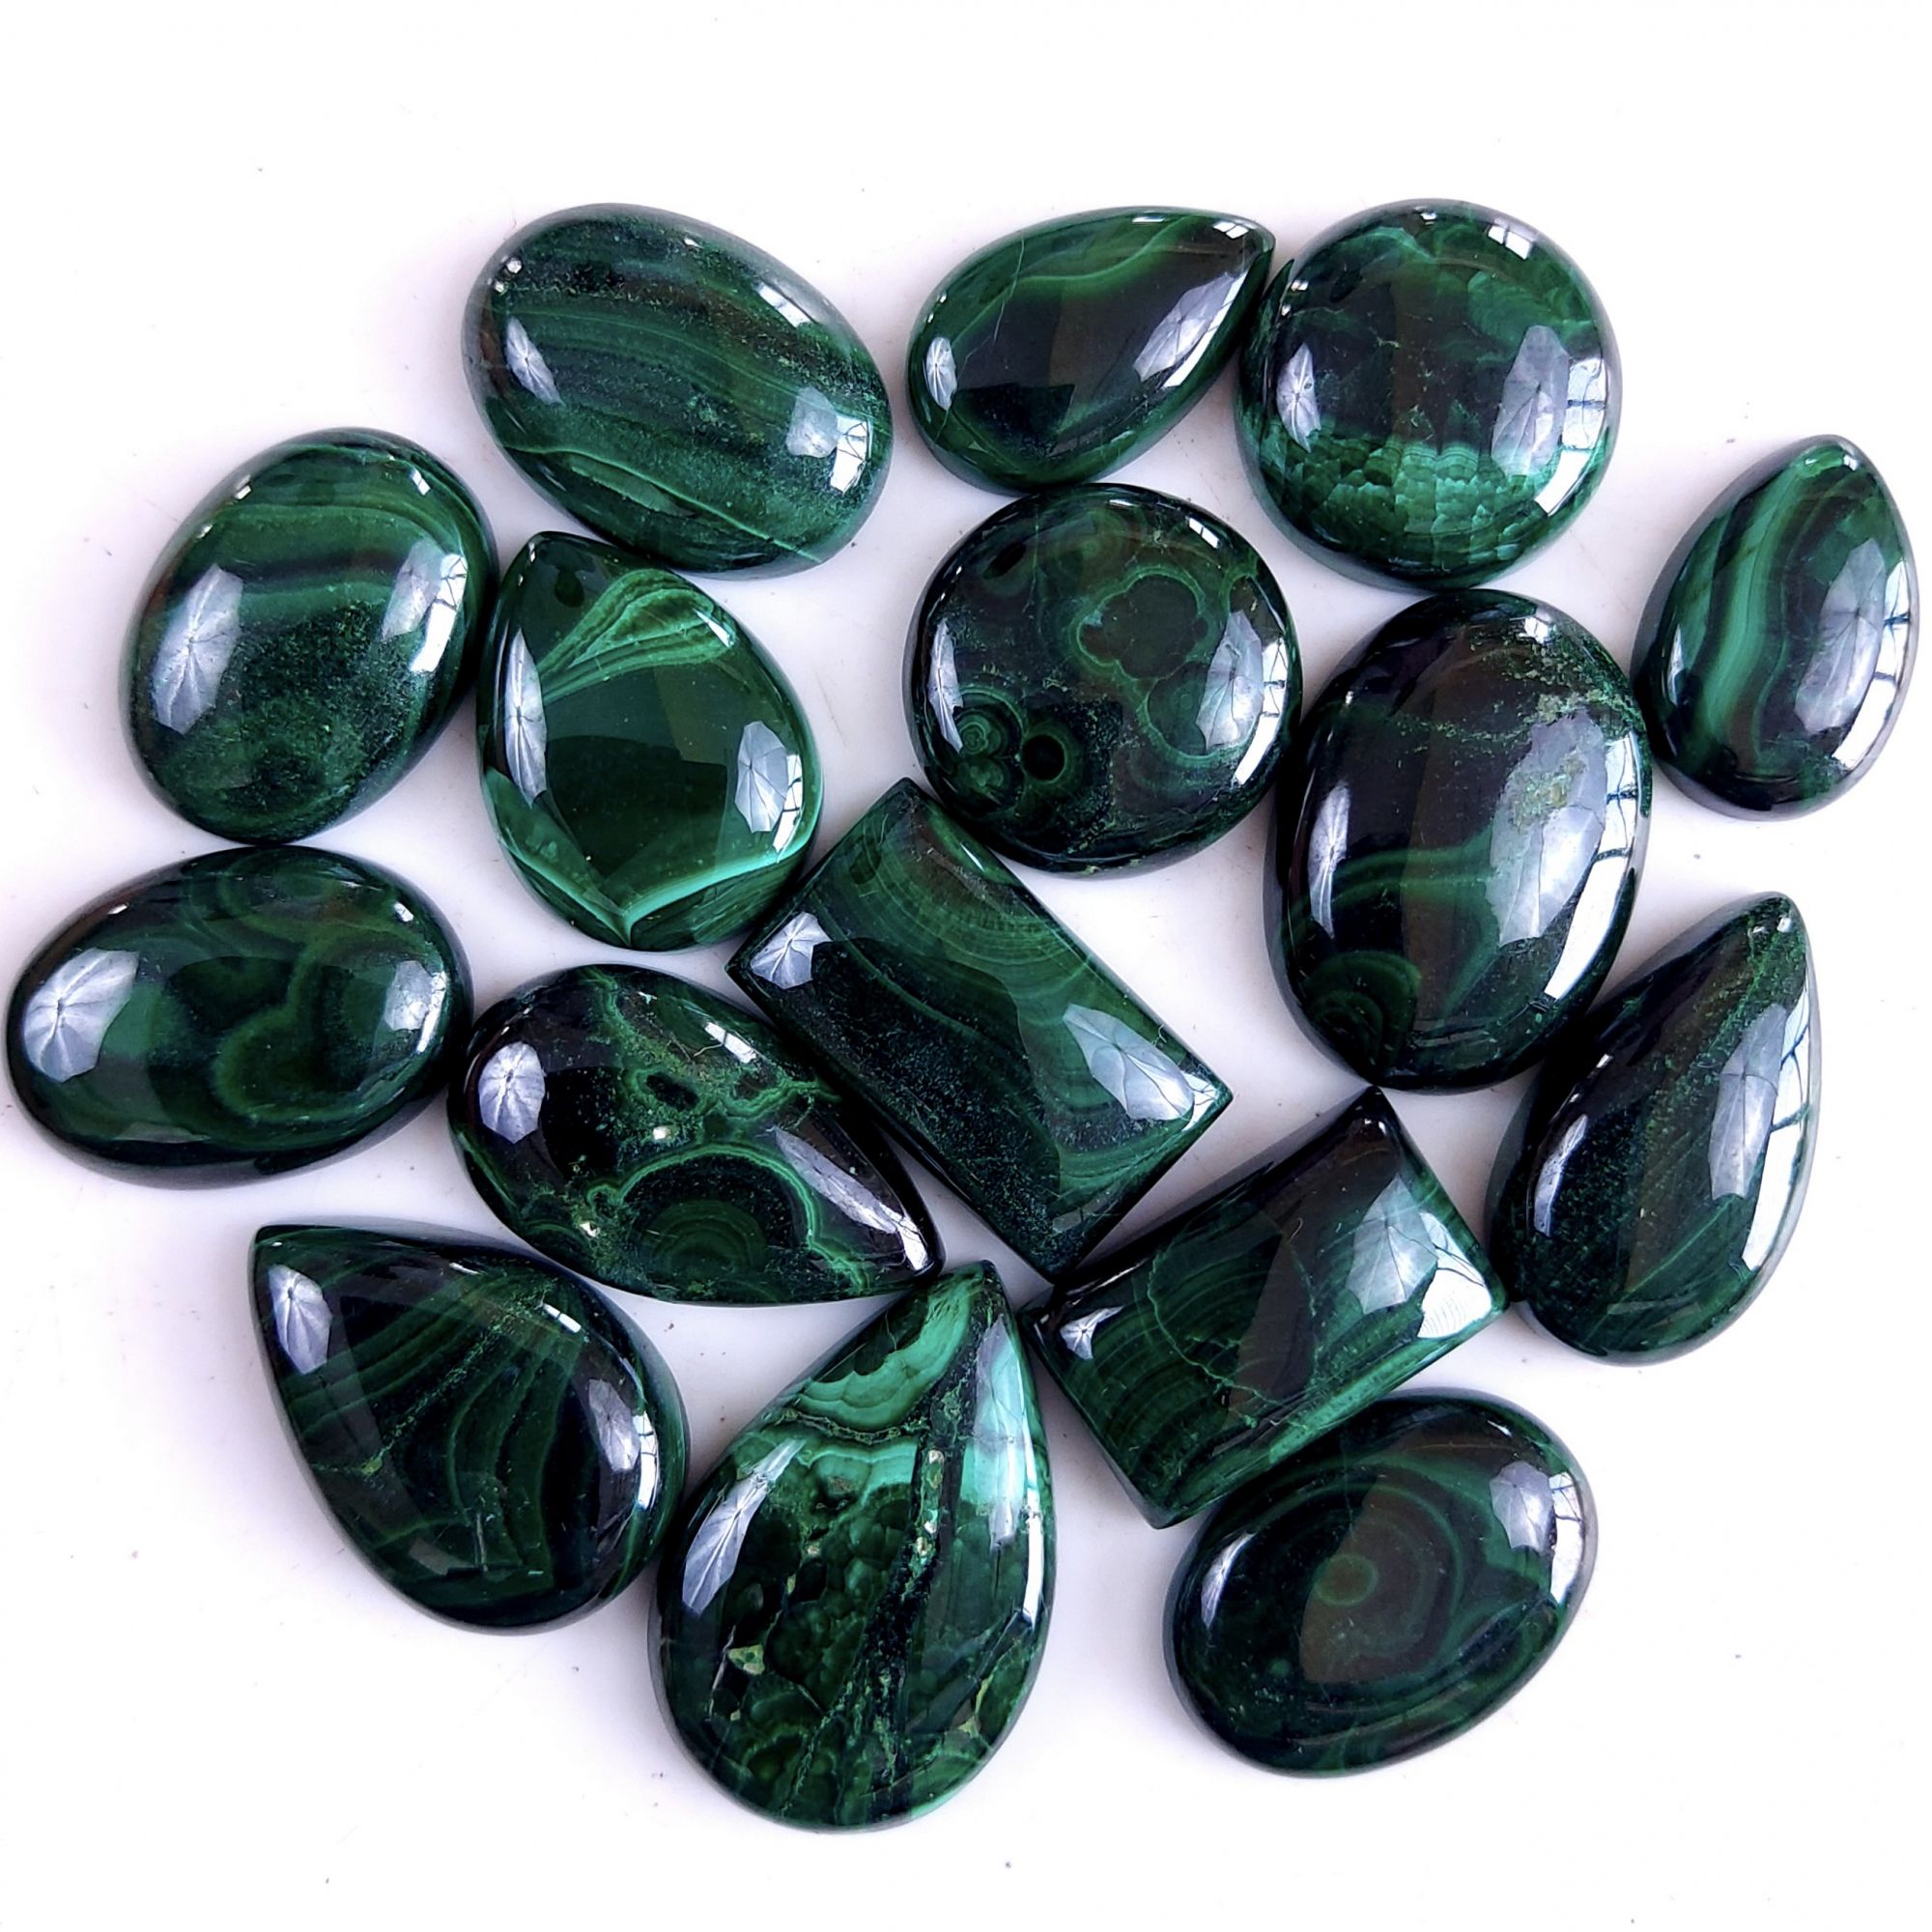 16Pcs 371Cts Natural Green Malachite Flat Back Loose Cabochon Gemstone For Handmade Jewelry Making and Craft Supplies 22x13 16x10mm#9333